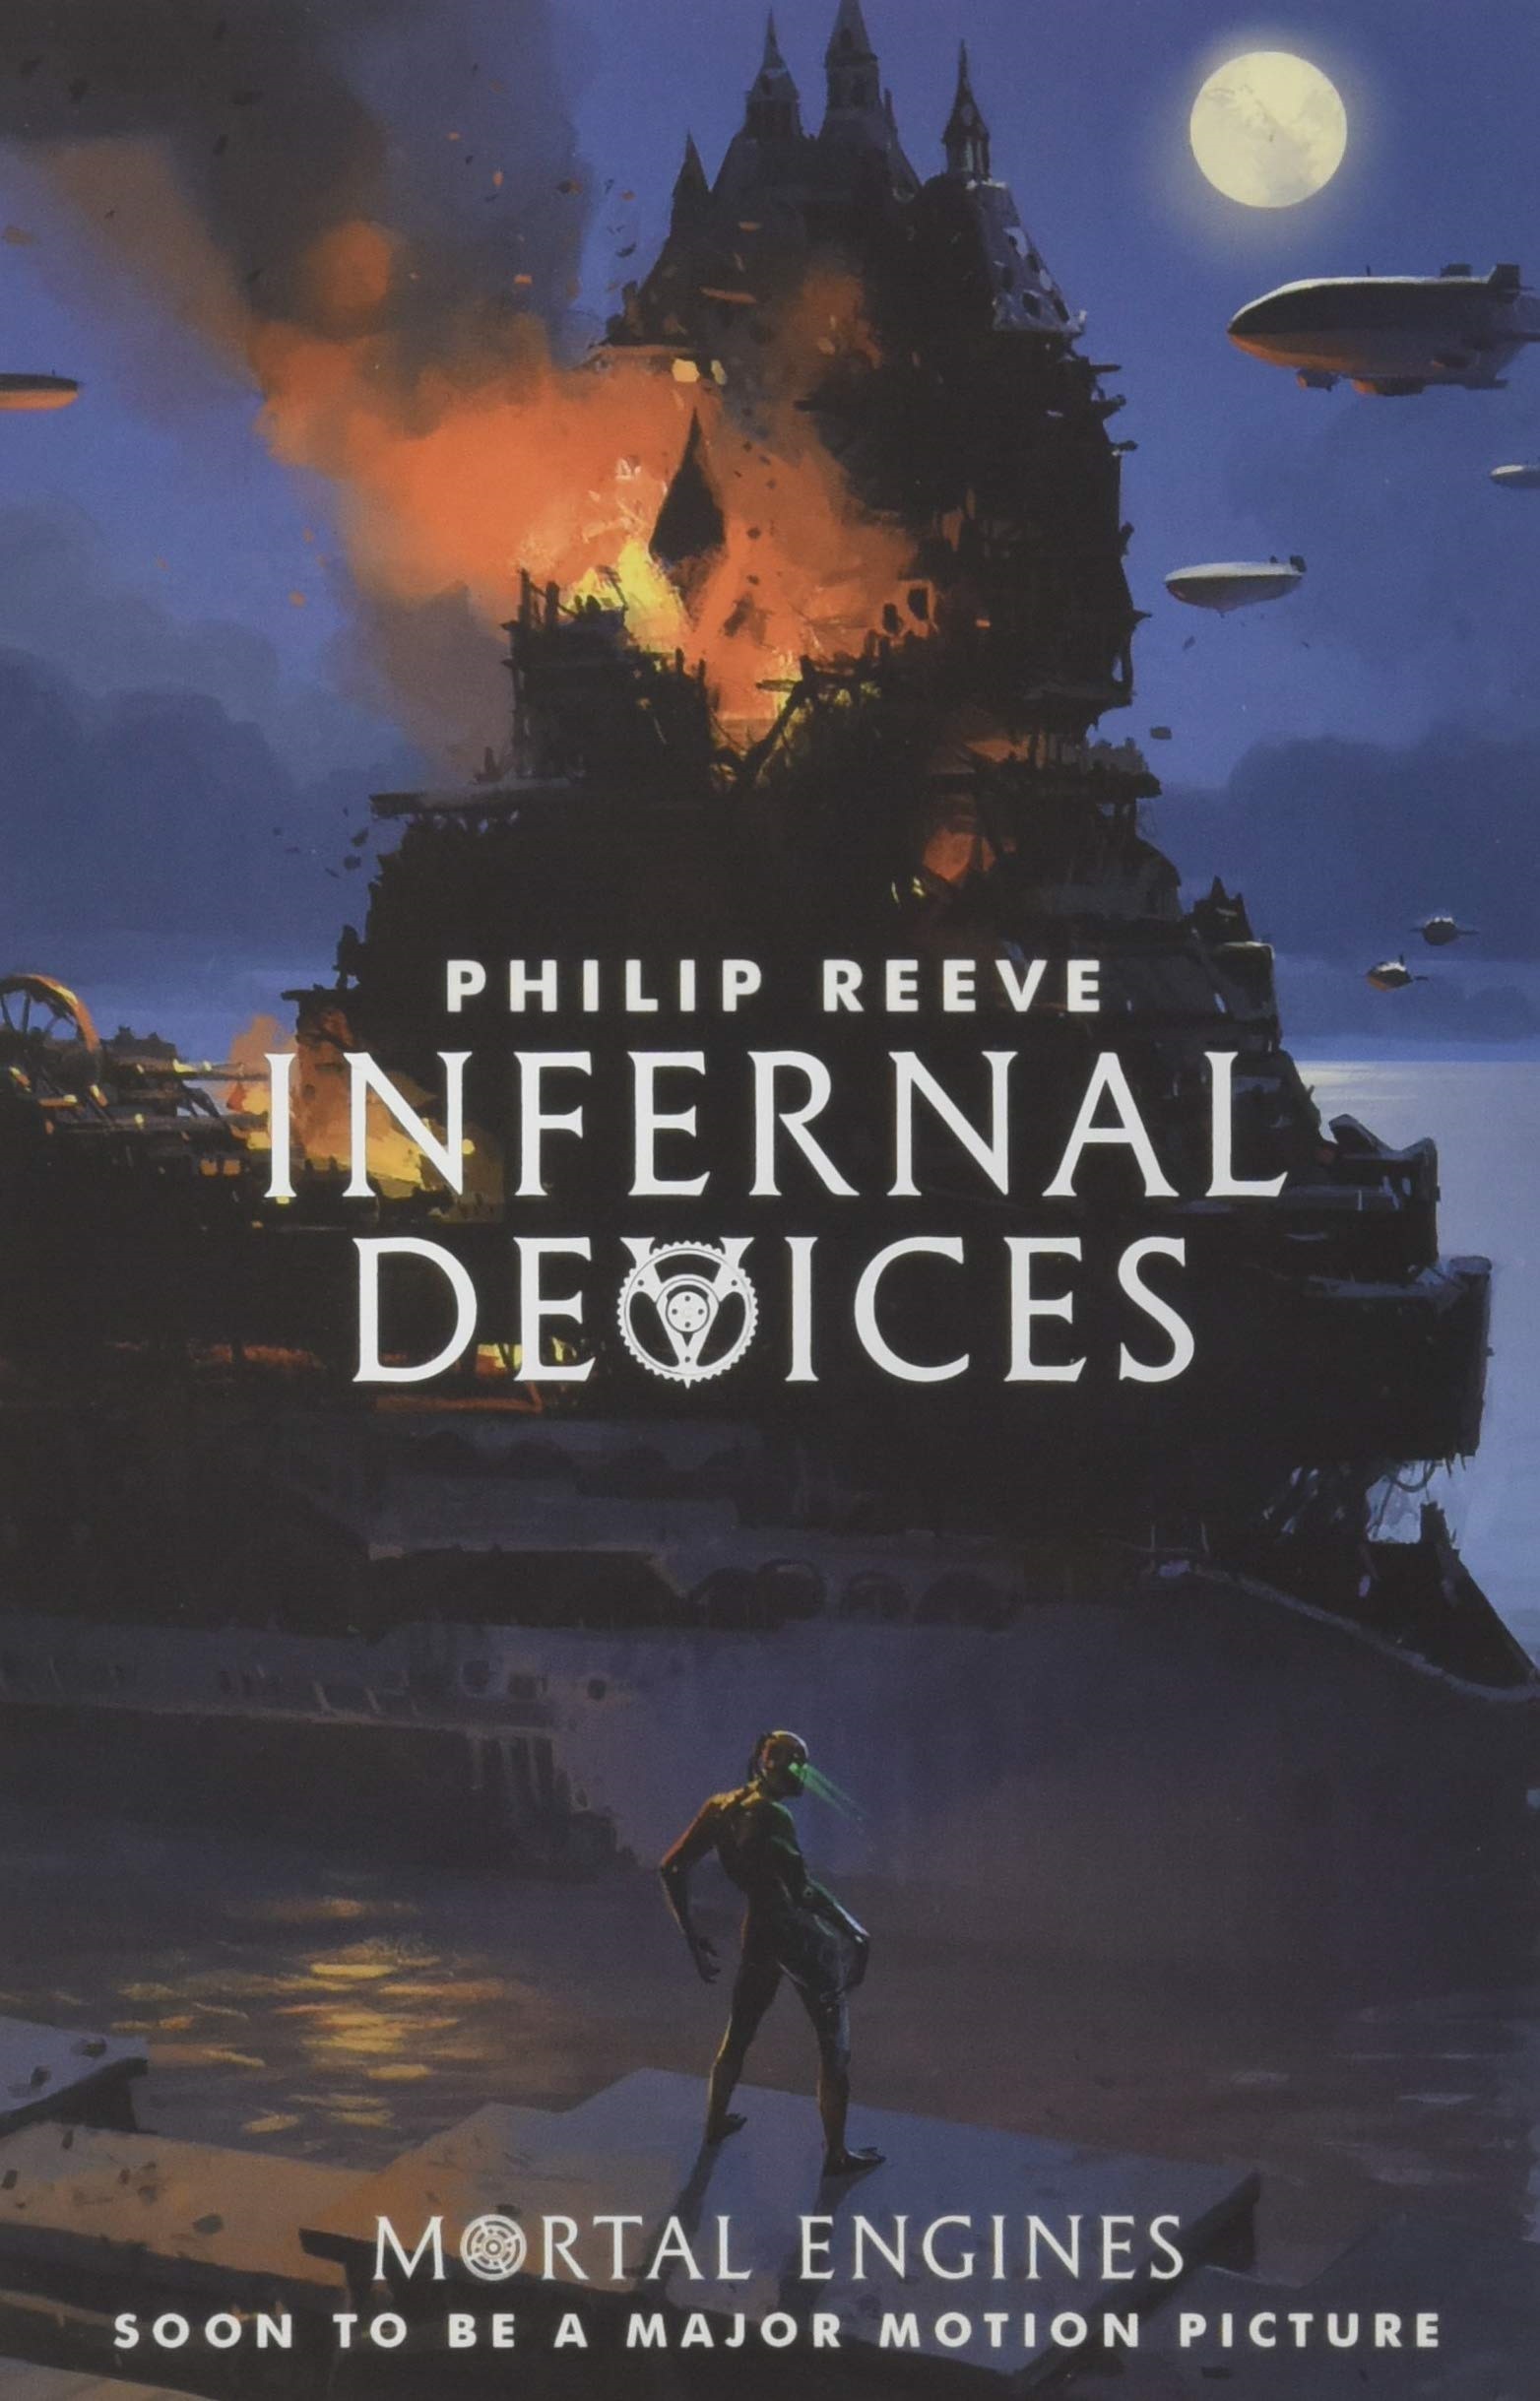 Infernal Devices reeve philip mortal engines 1 mortal engines series